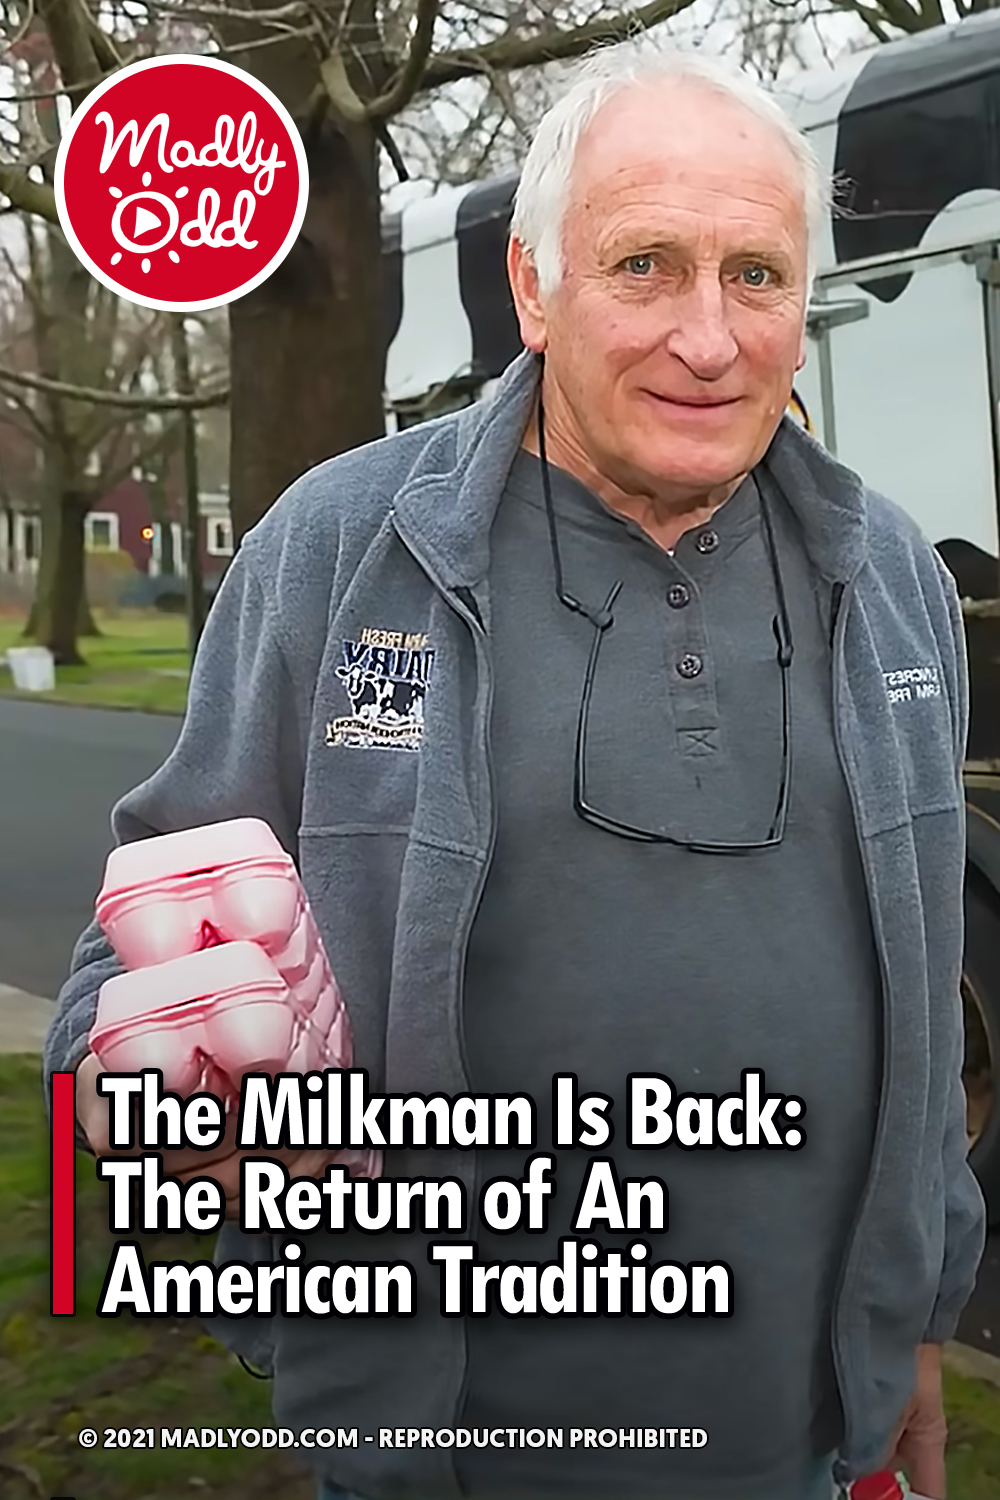 The Milkman Is Back: The Return of An American Tradition